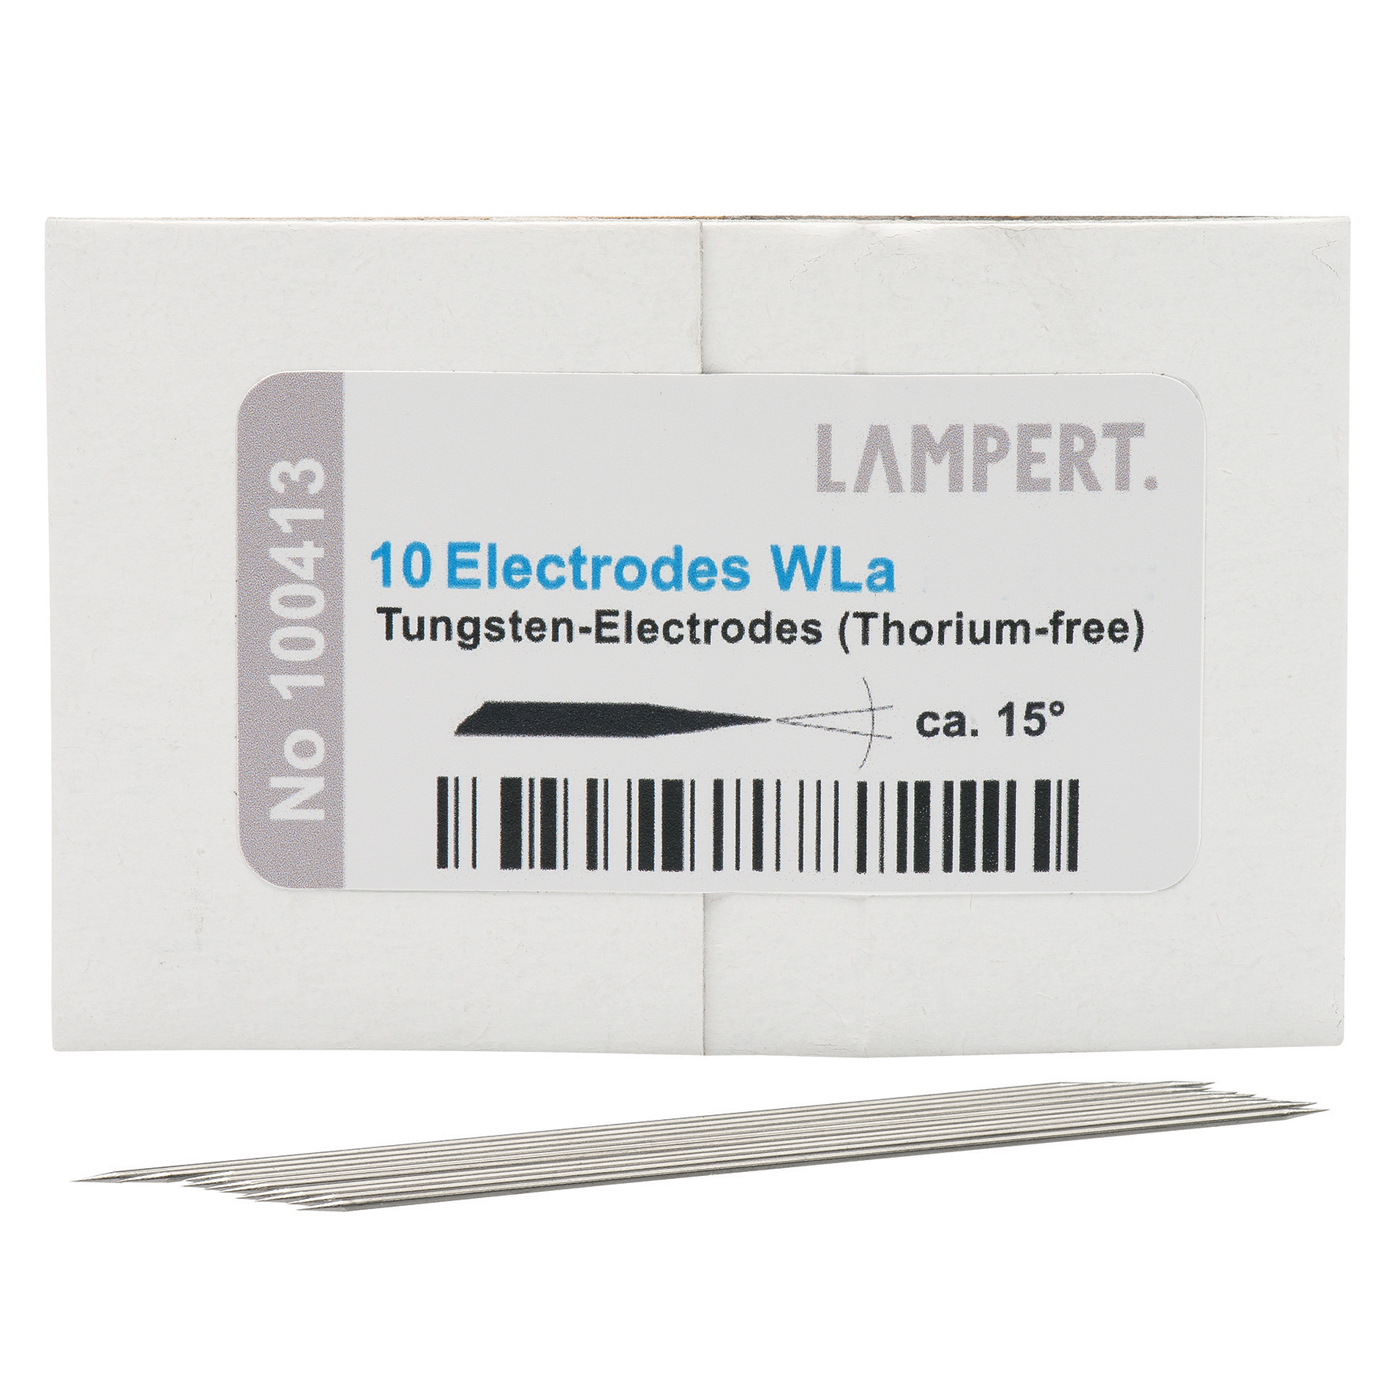 WLa Special Electrodes, 0.8 x 50 mm - 10 pieces